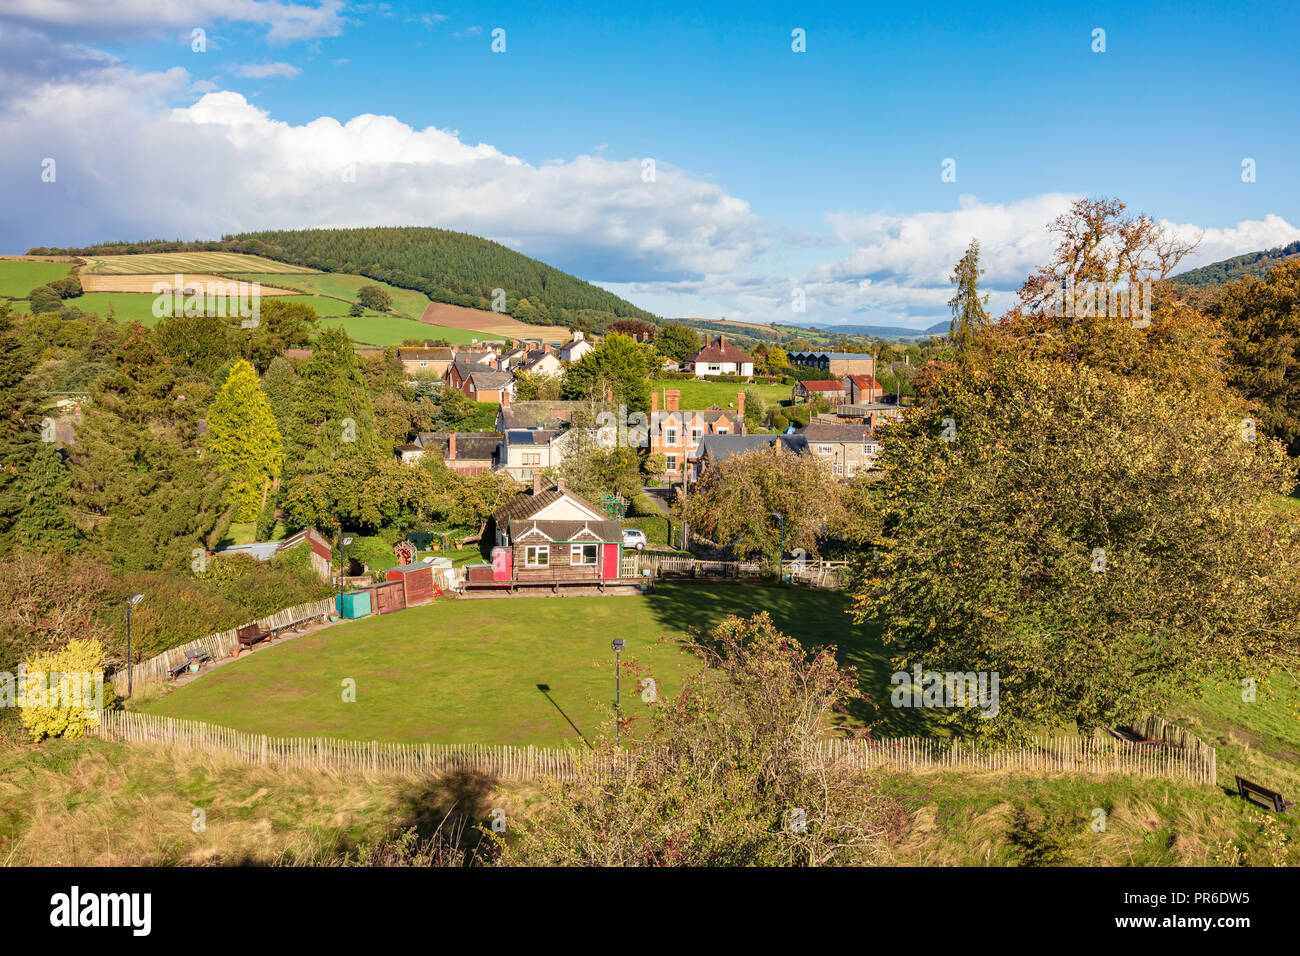 Clun village Bowling Club with wooden club house, on the outskirts of the pretty village, with distant hill views, Clun, Shropshire, UK Stock Photo